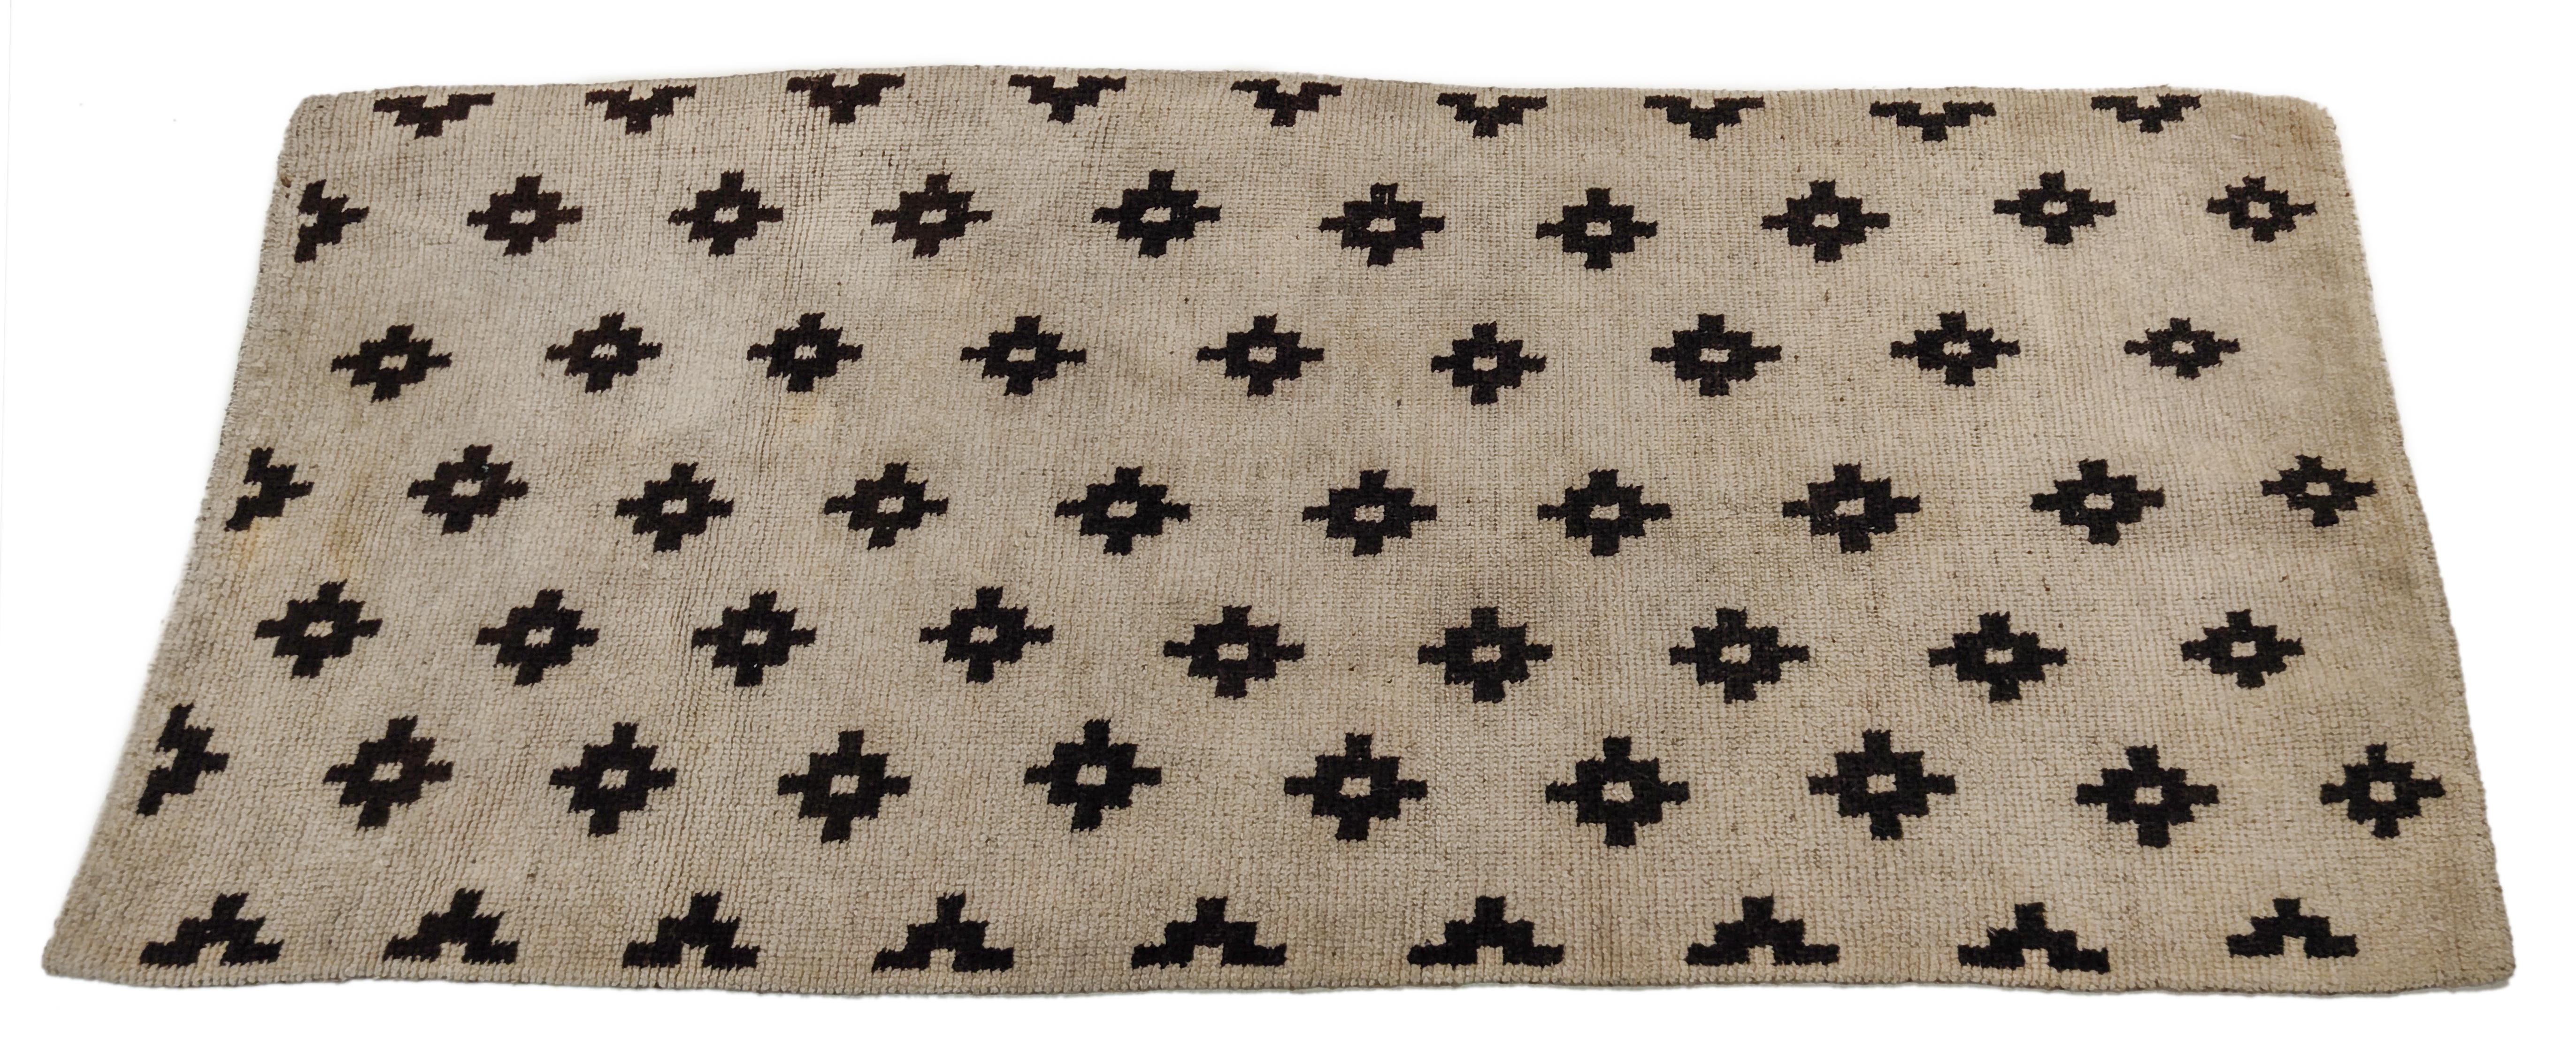 Antique White Ground Tibetan Khaden Rug with Black Stepped Diamonds In Good Condition For Sale In Milan, IT